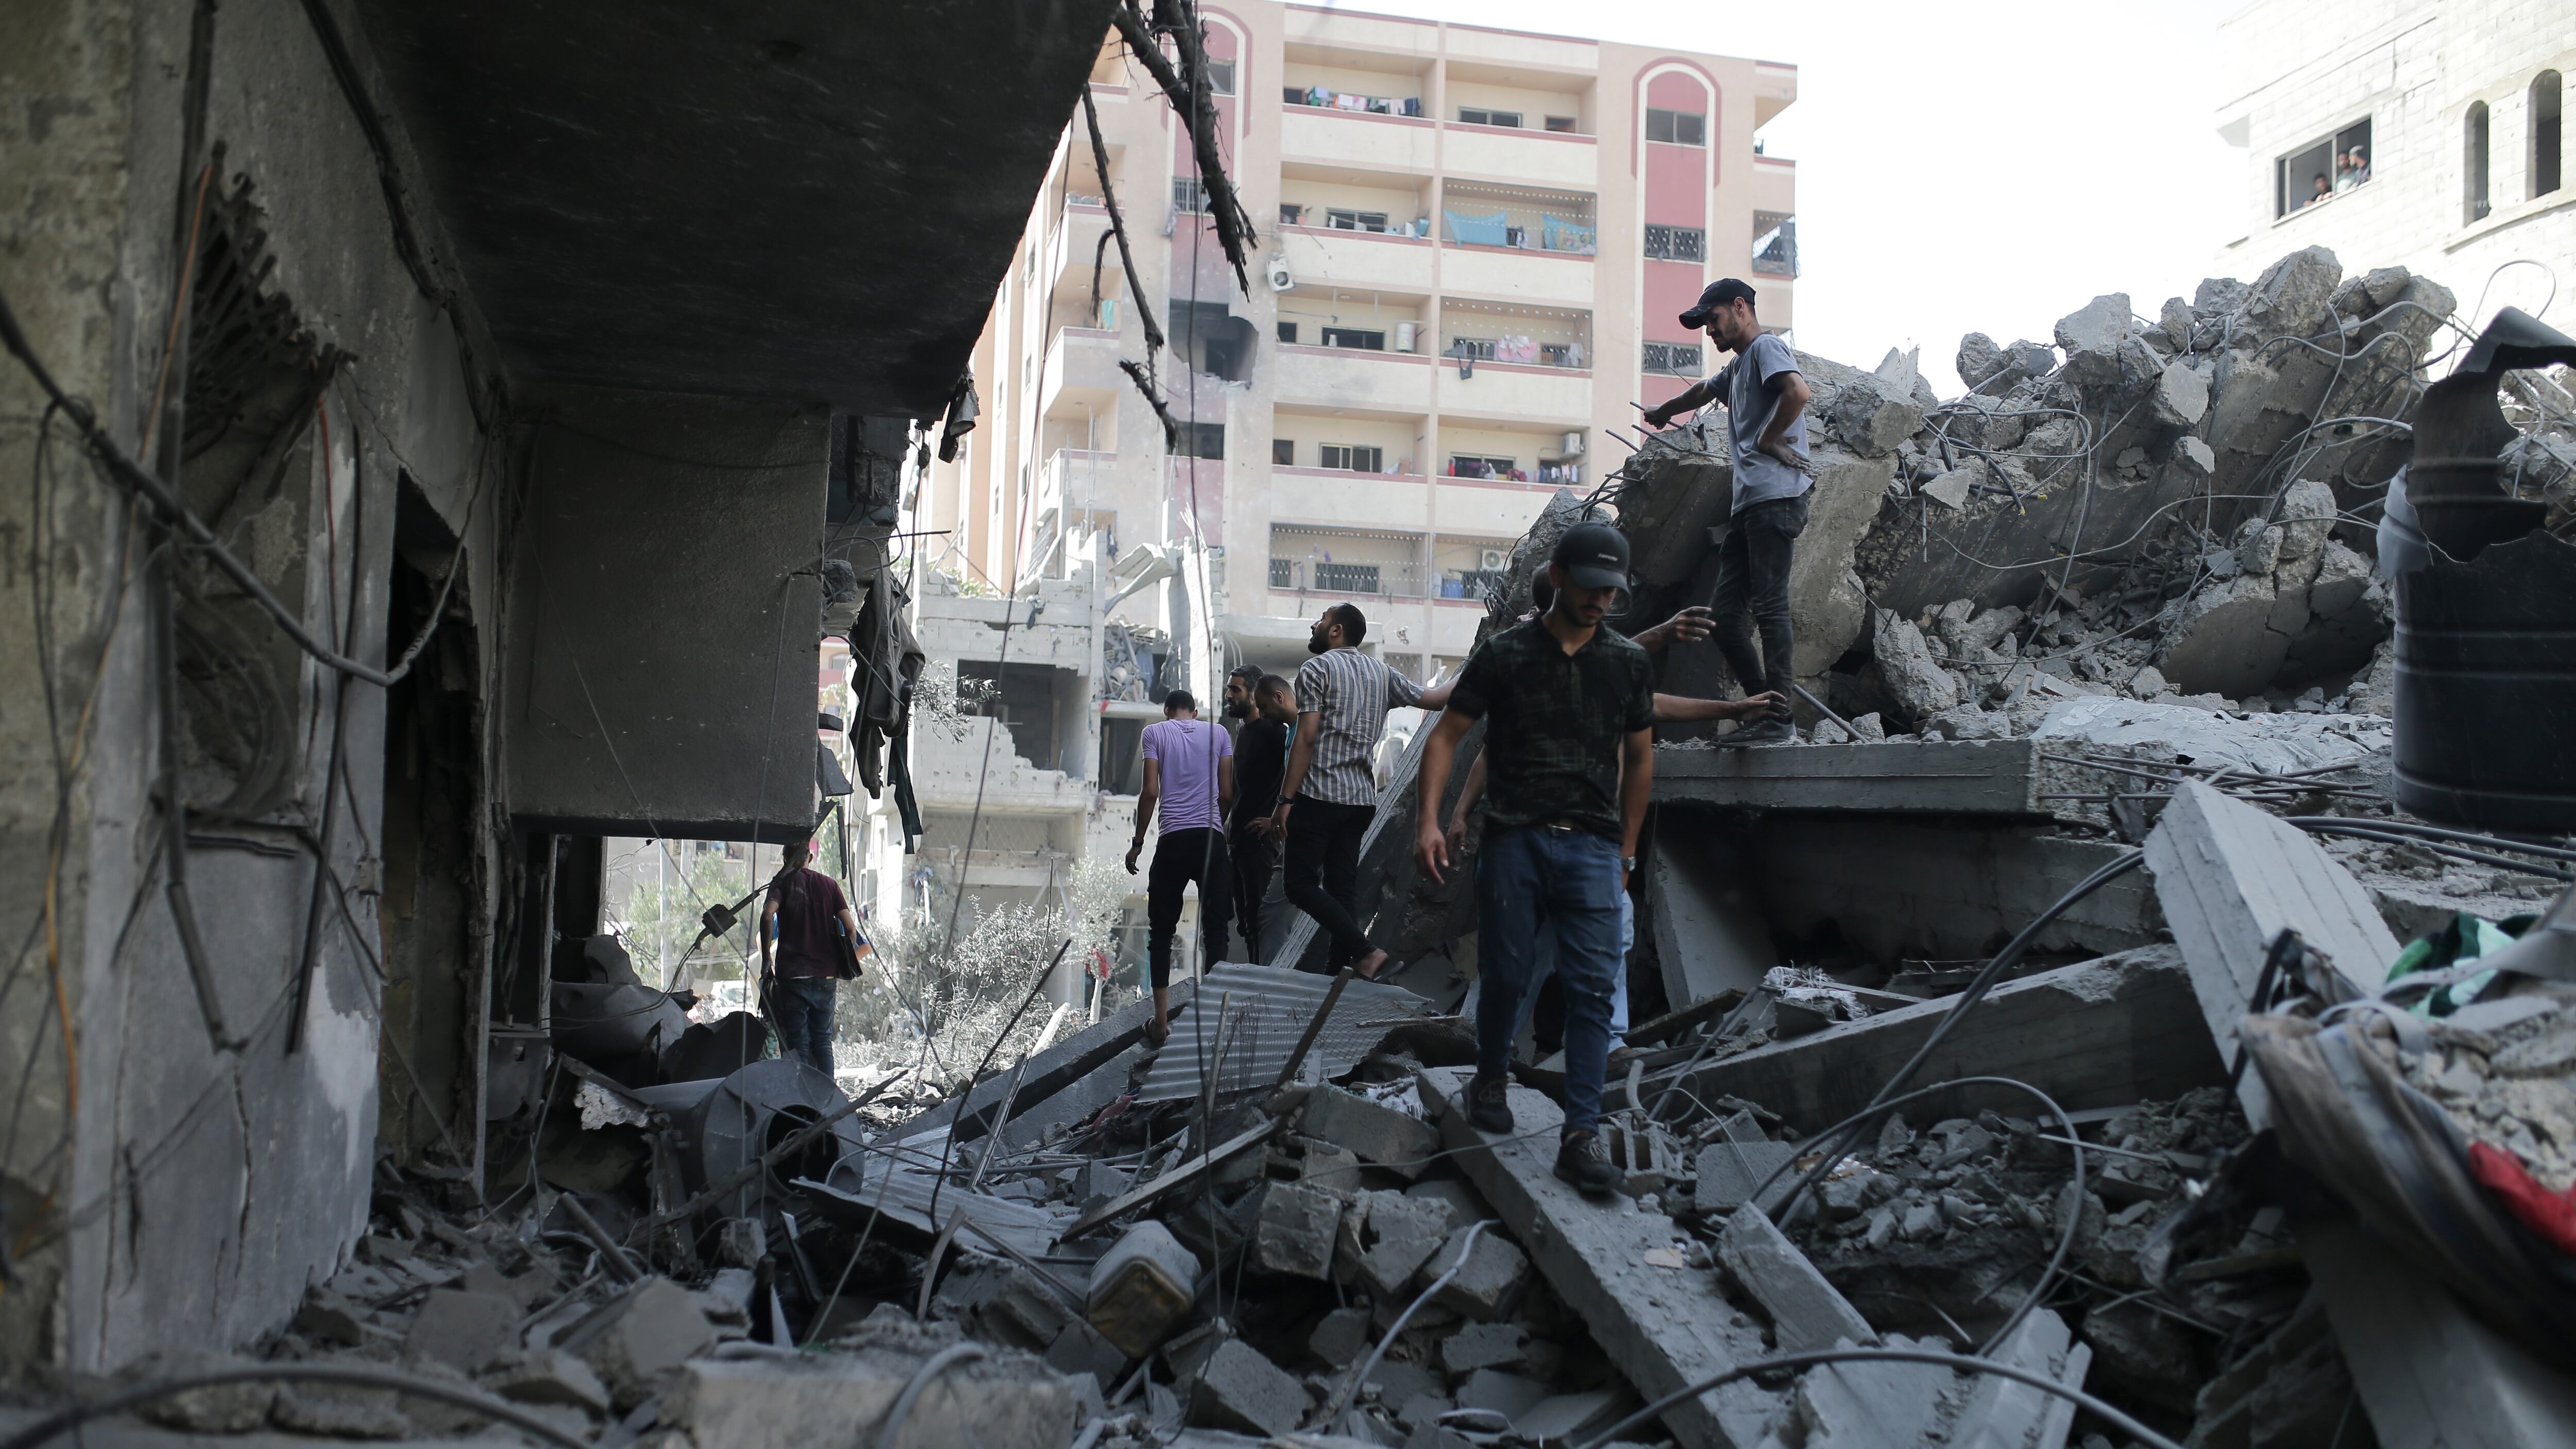 Palestinians stand on the rubble of a building bombed by Israel in the Nuseirat refugee camp, Gaza Strip (Jehad Alshrafi/AP)